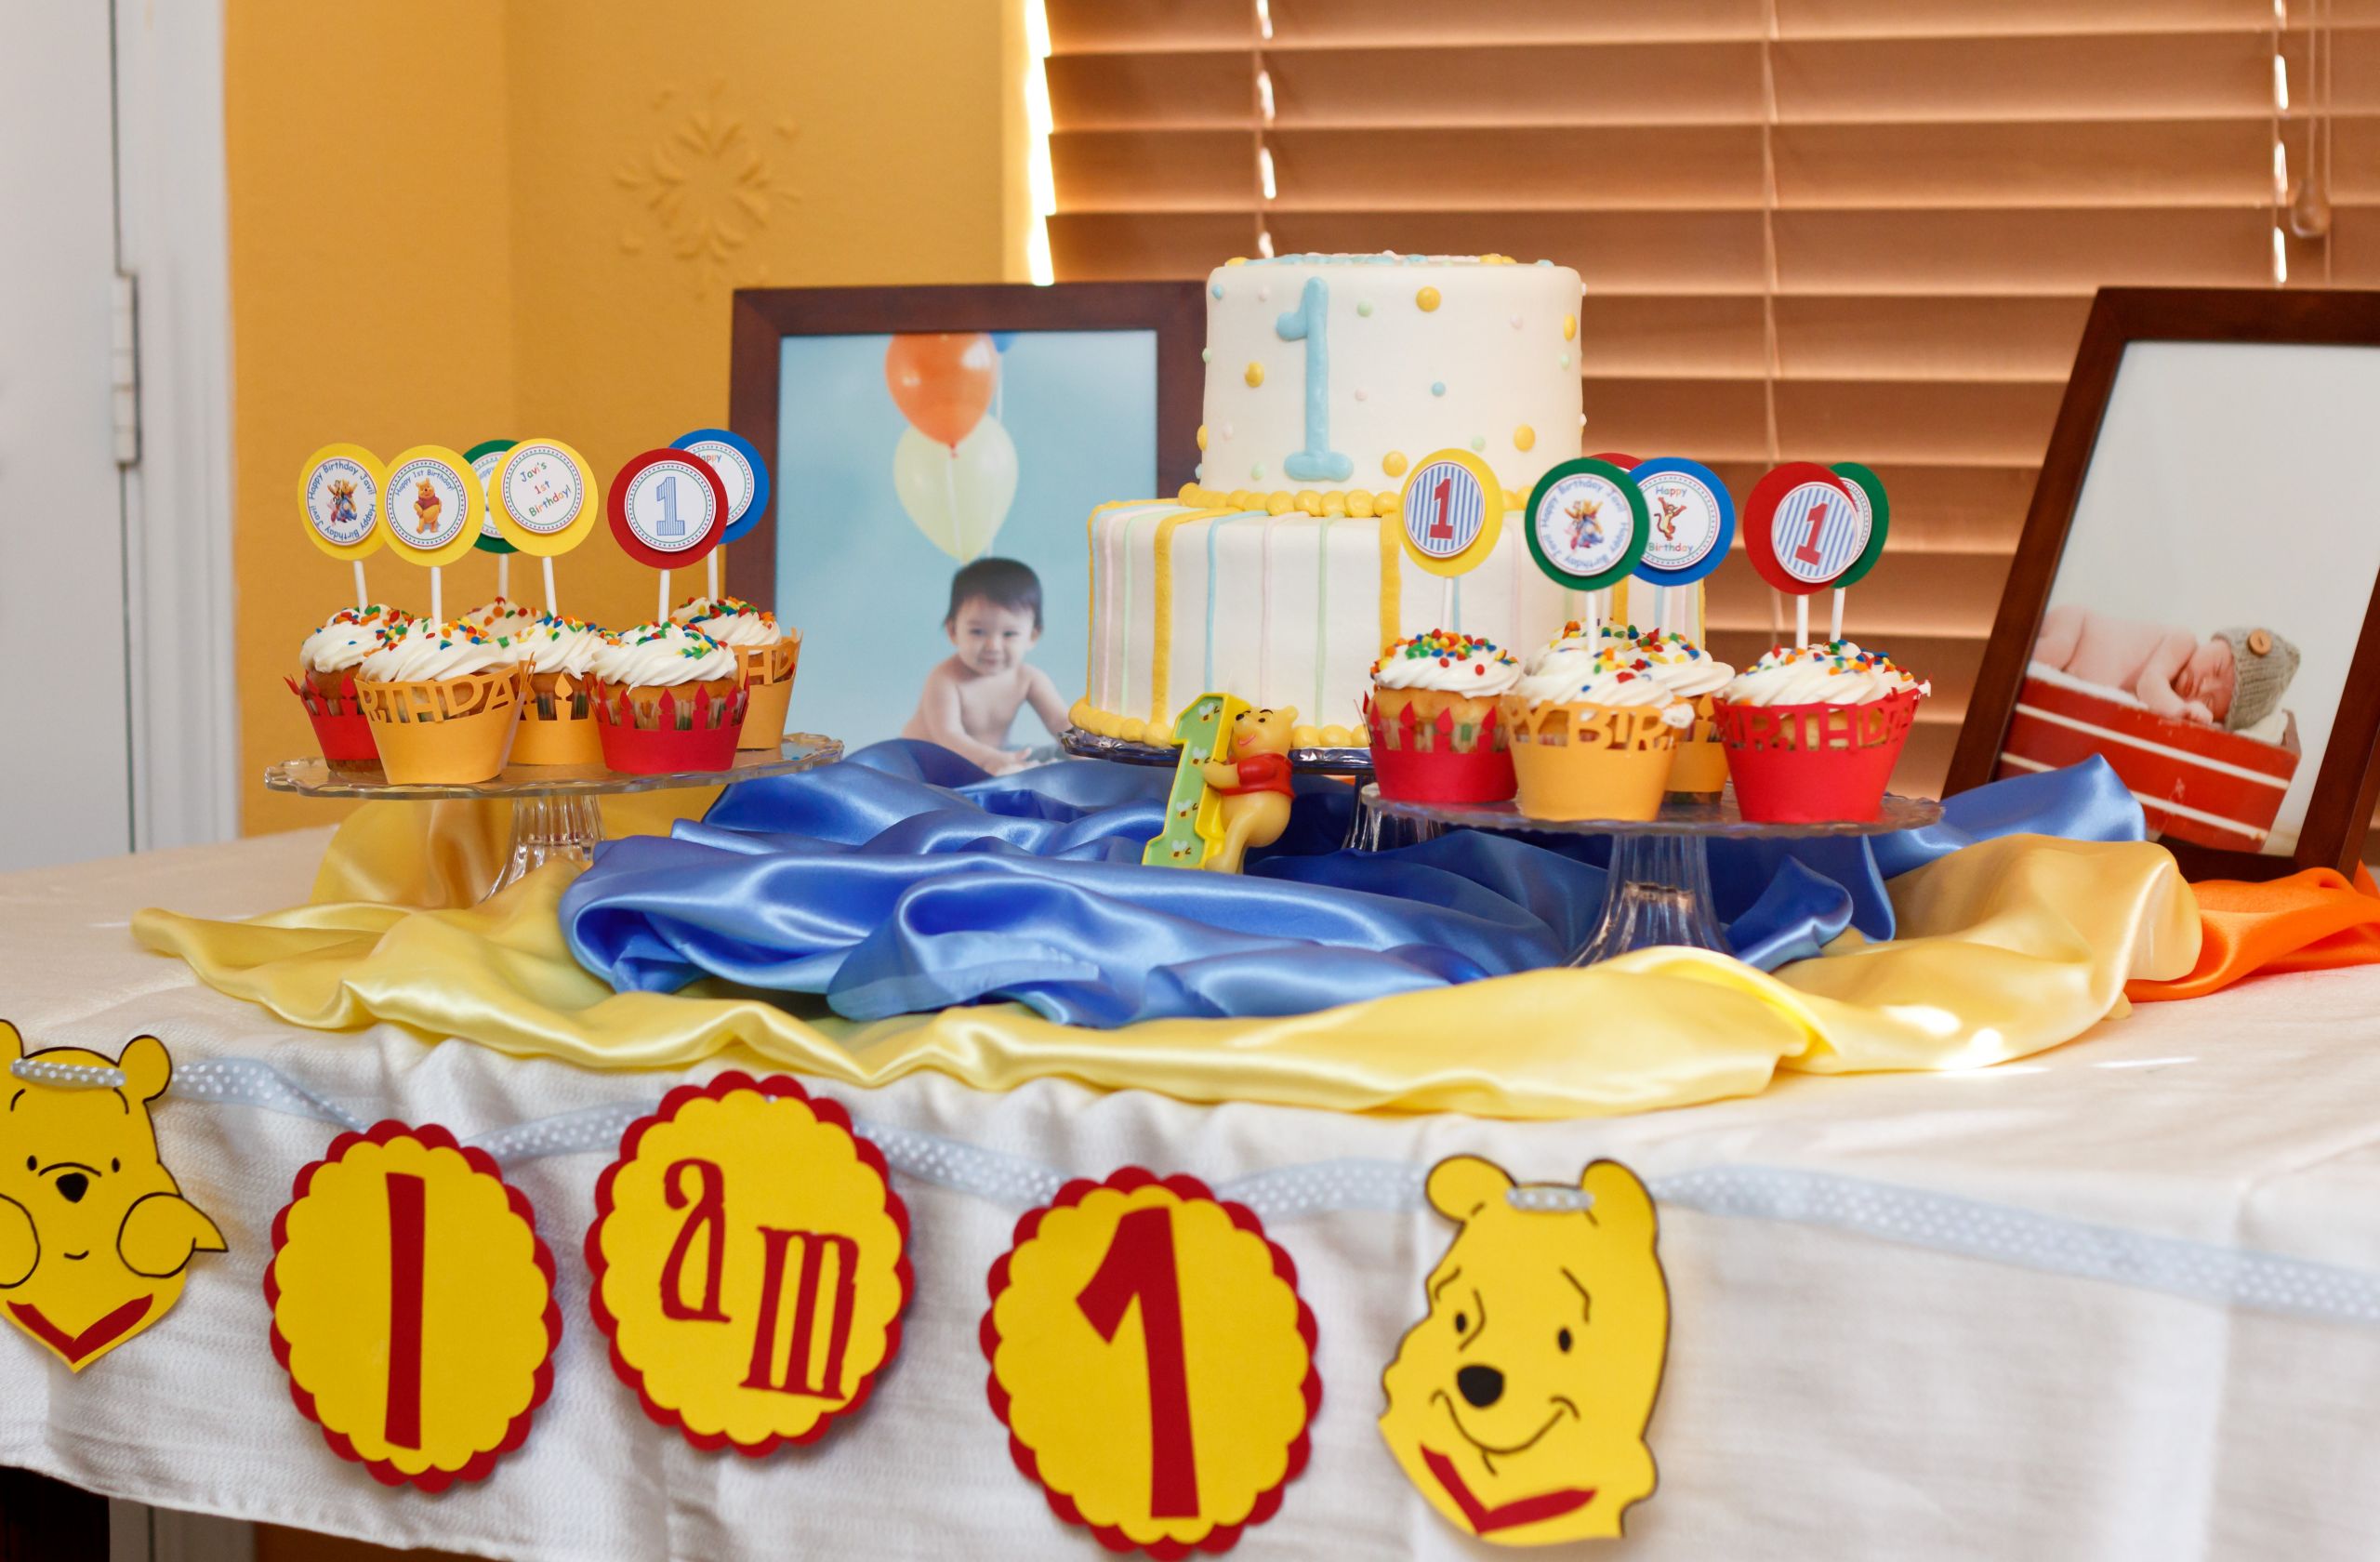 Winnie The Pooh Birthday Decorations
 Winnie the Pooh My son’s first birthday party